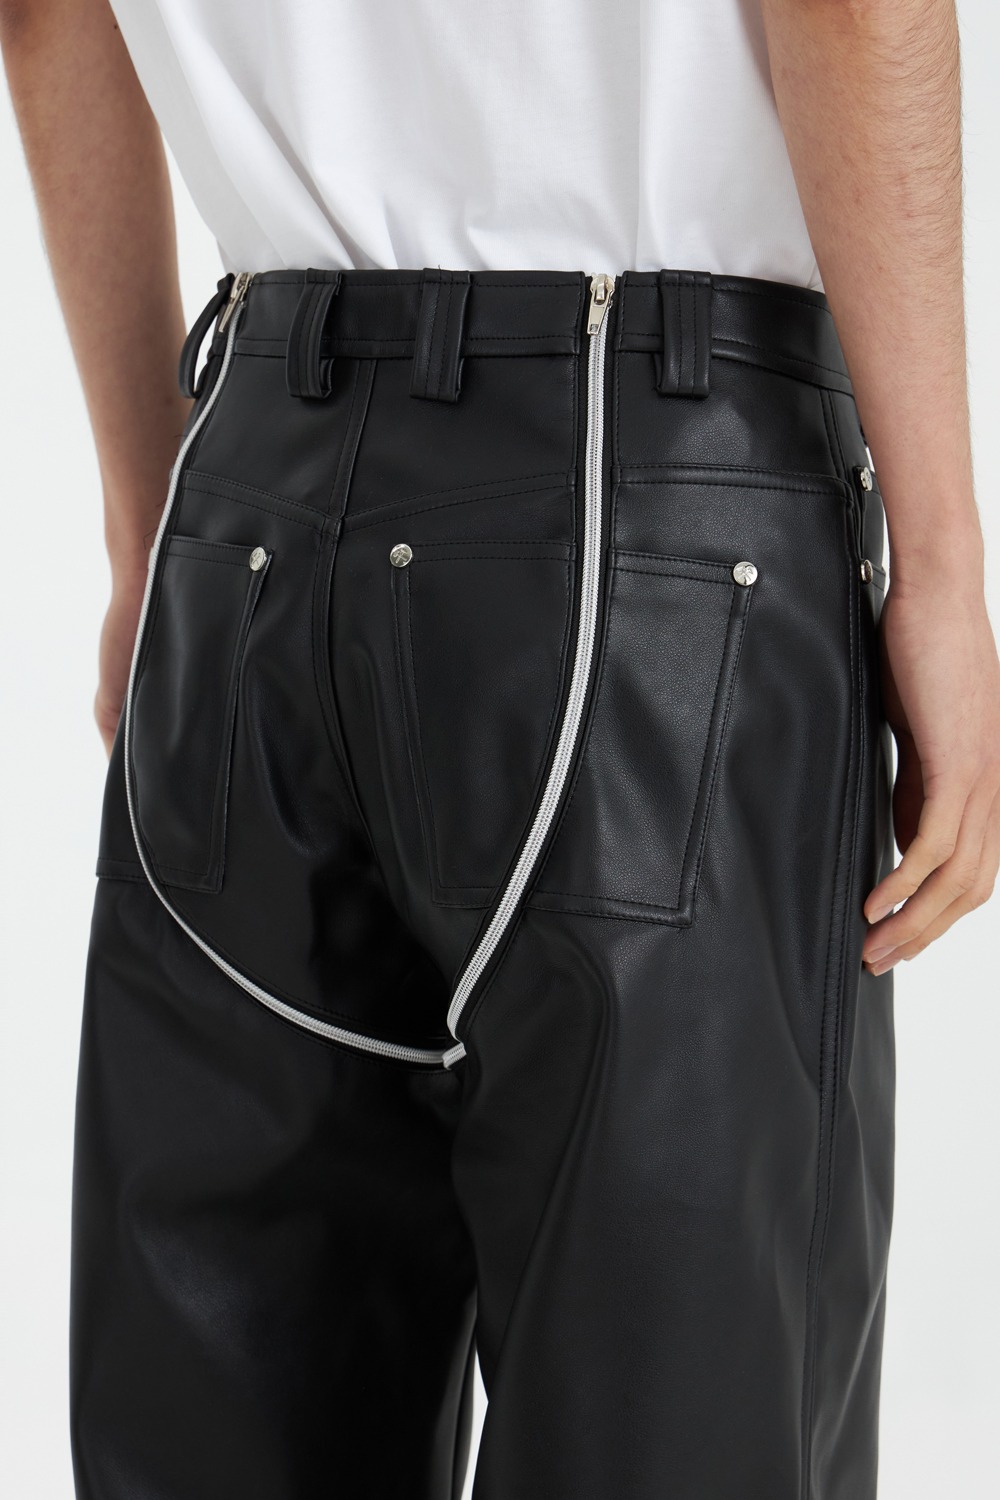 Two Zippers Pleather Trouser - Black